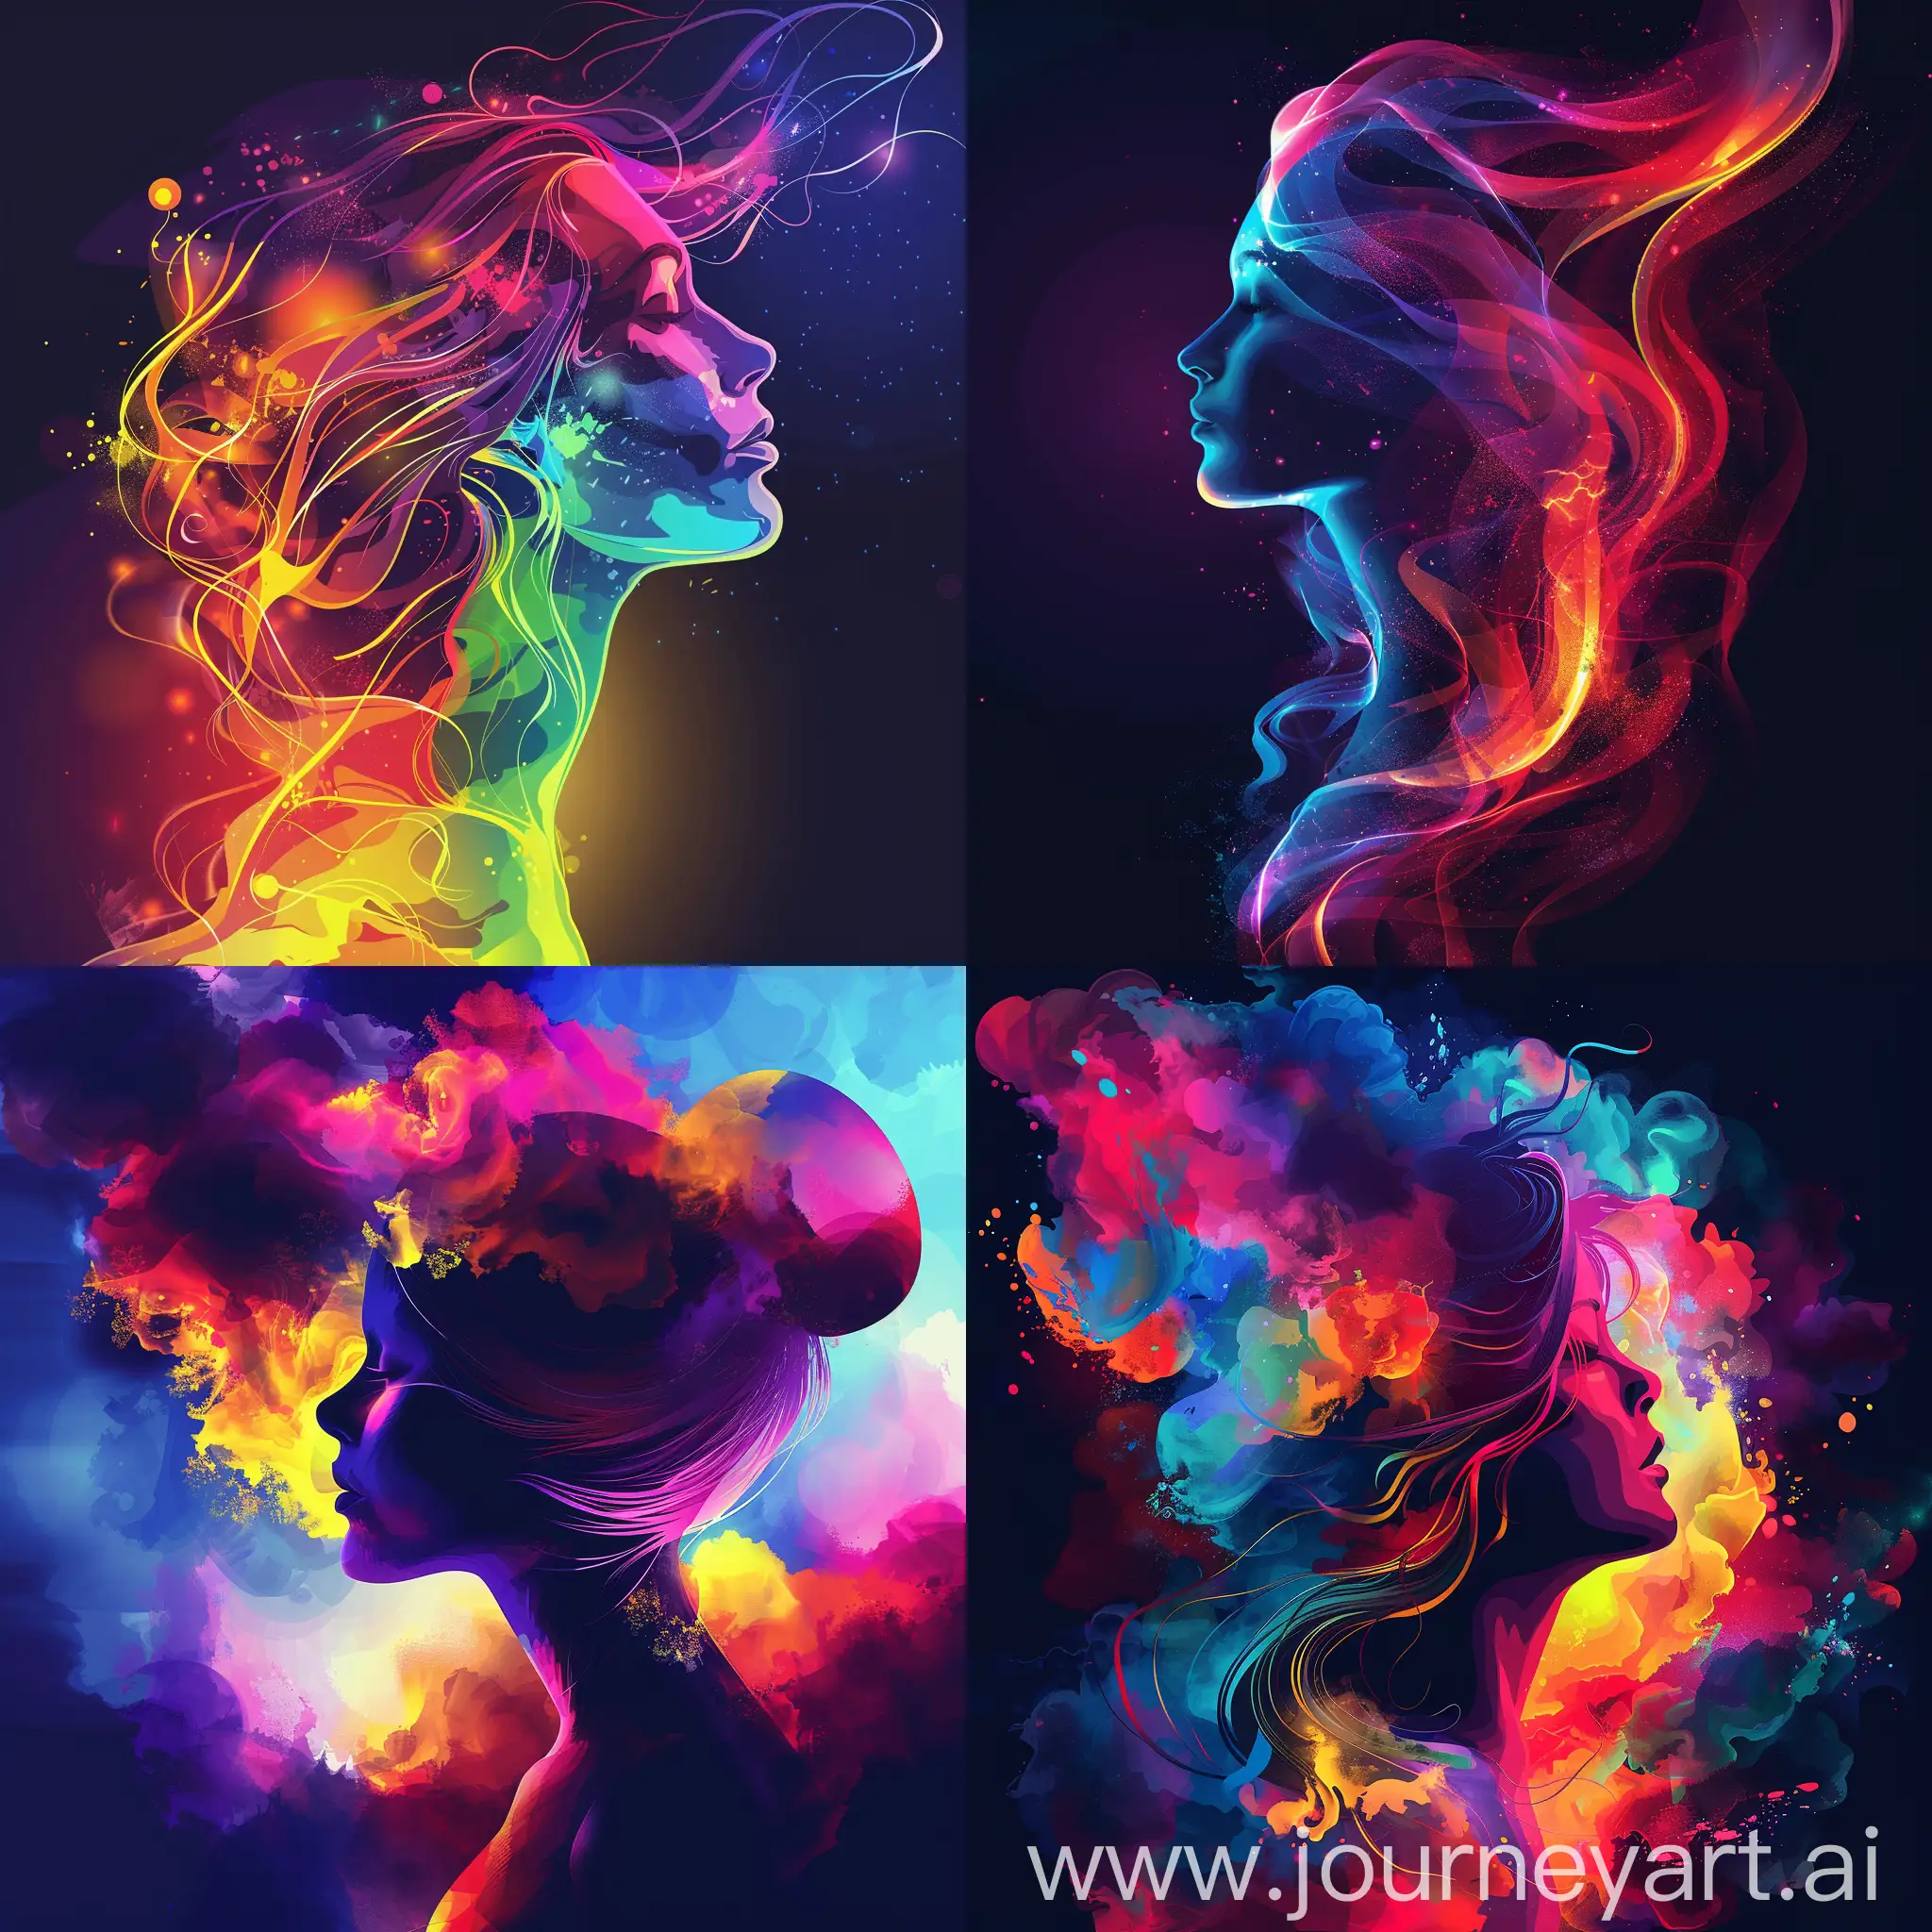 I want a picture that has a colorful background without any other shape in it, a colorful colorful background, atmospheric, atmospheric, and showing the resistance of cancer women with a portrait design.